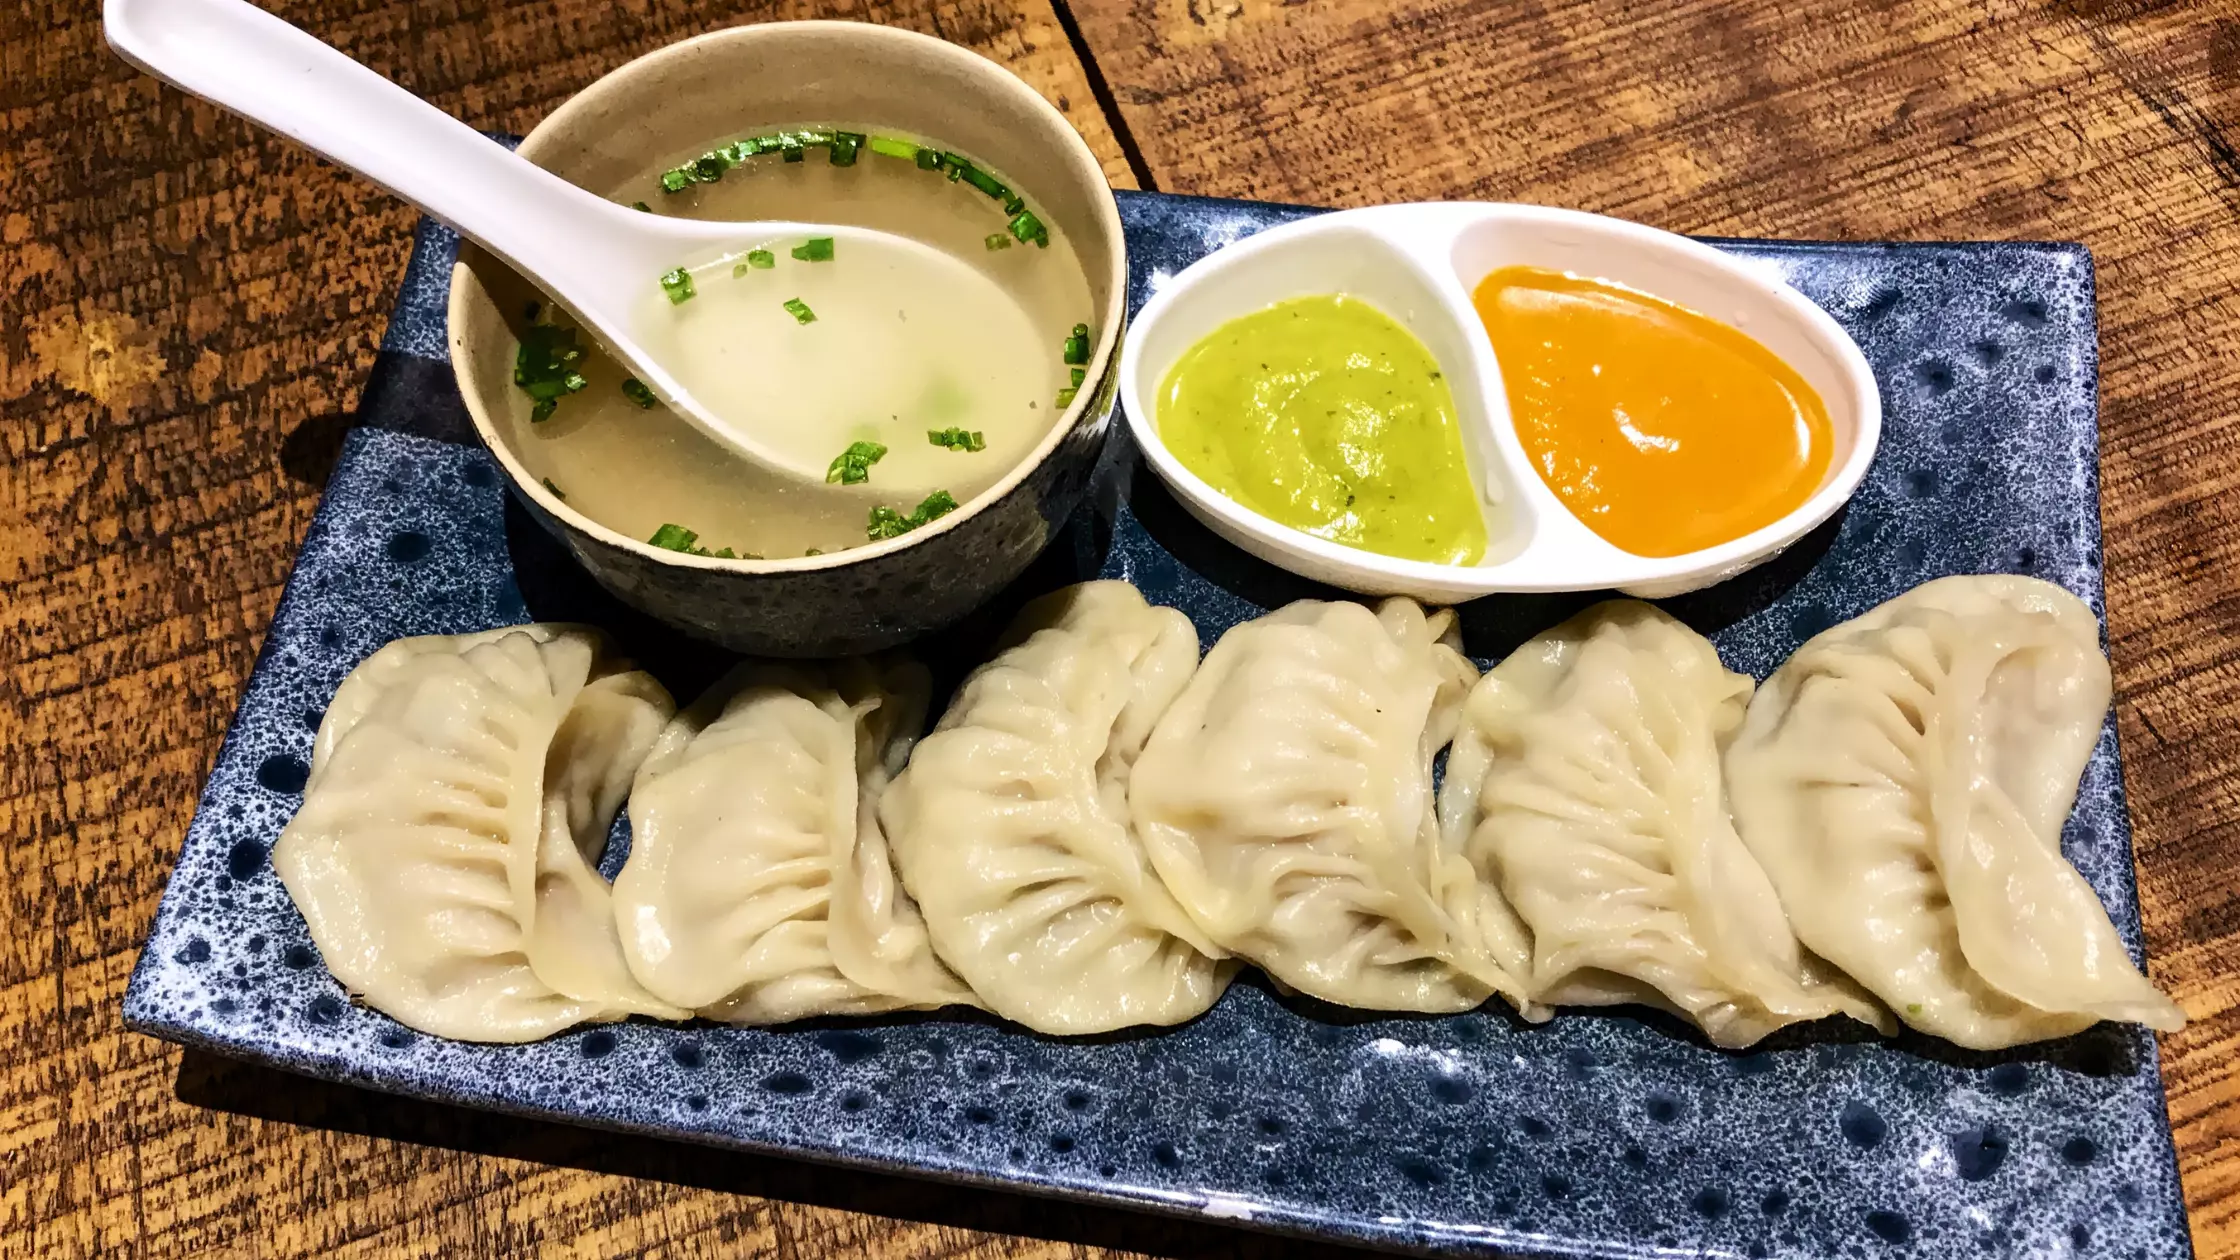 Momos are a popular example of Kasuli